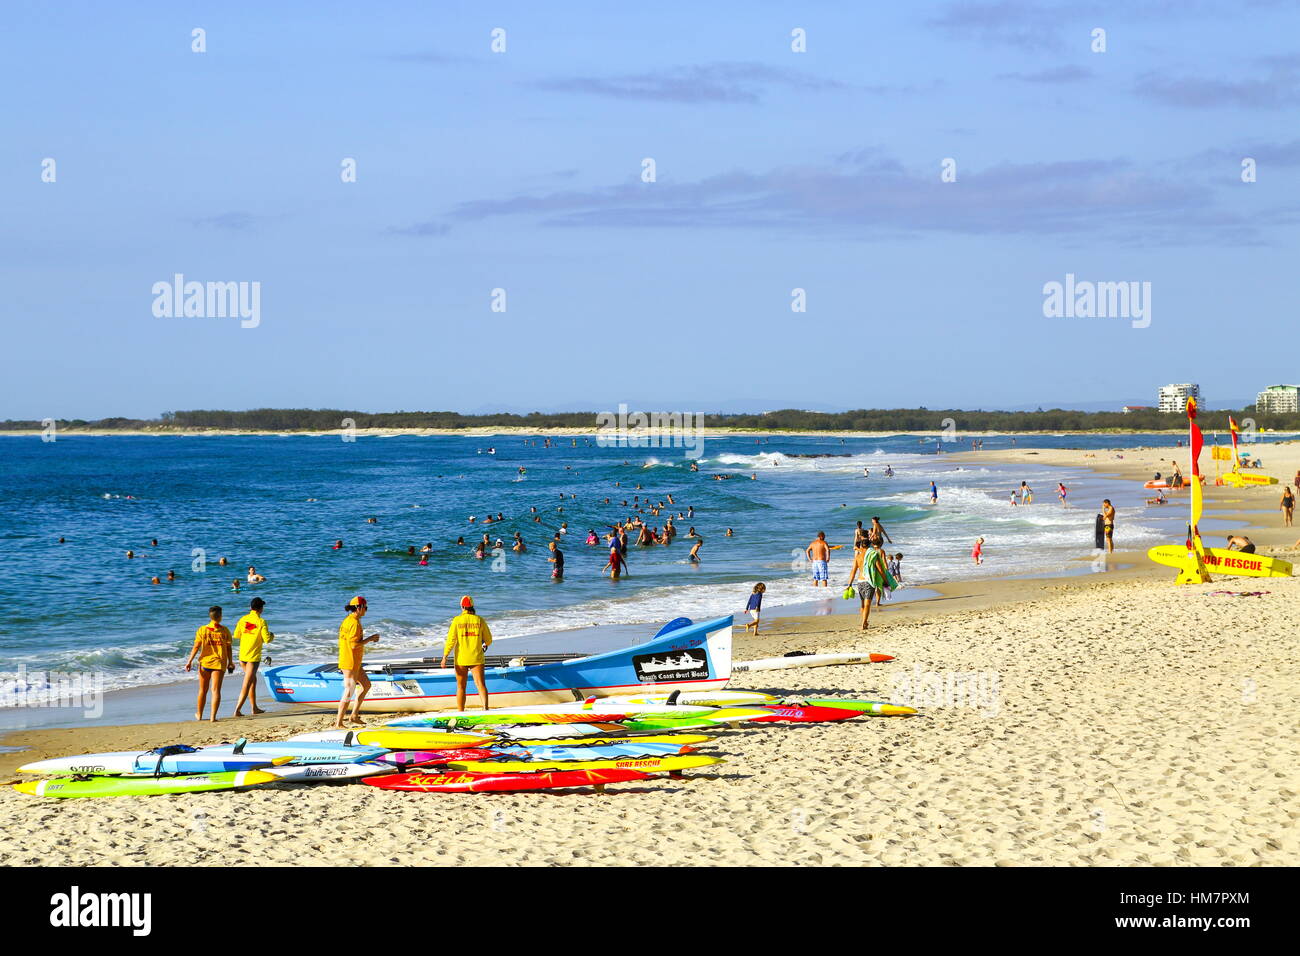 Surf Lifesavers launching a surf boat for some training at Kings Beach on the Sunshine Coast of Queensland, Australia. Stock Photo